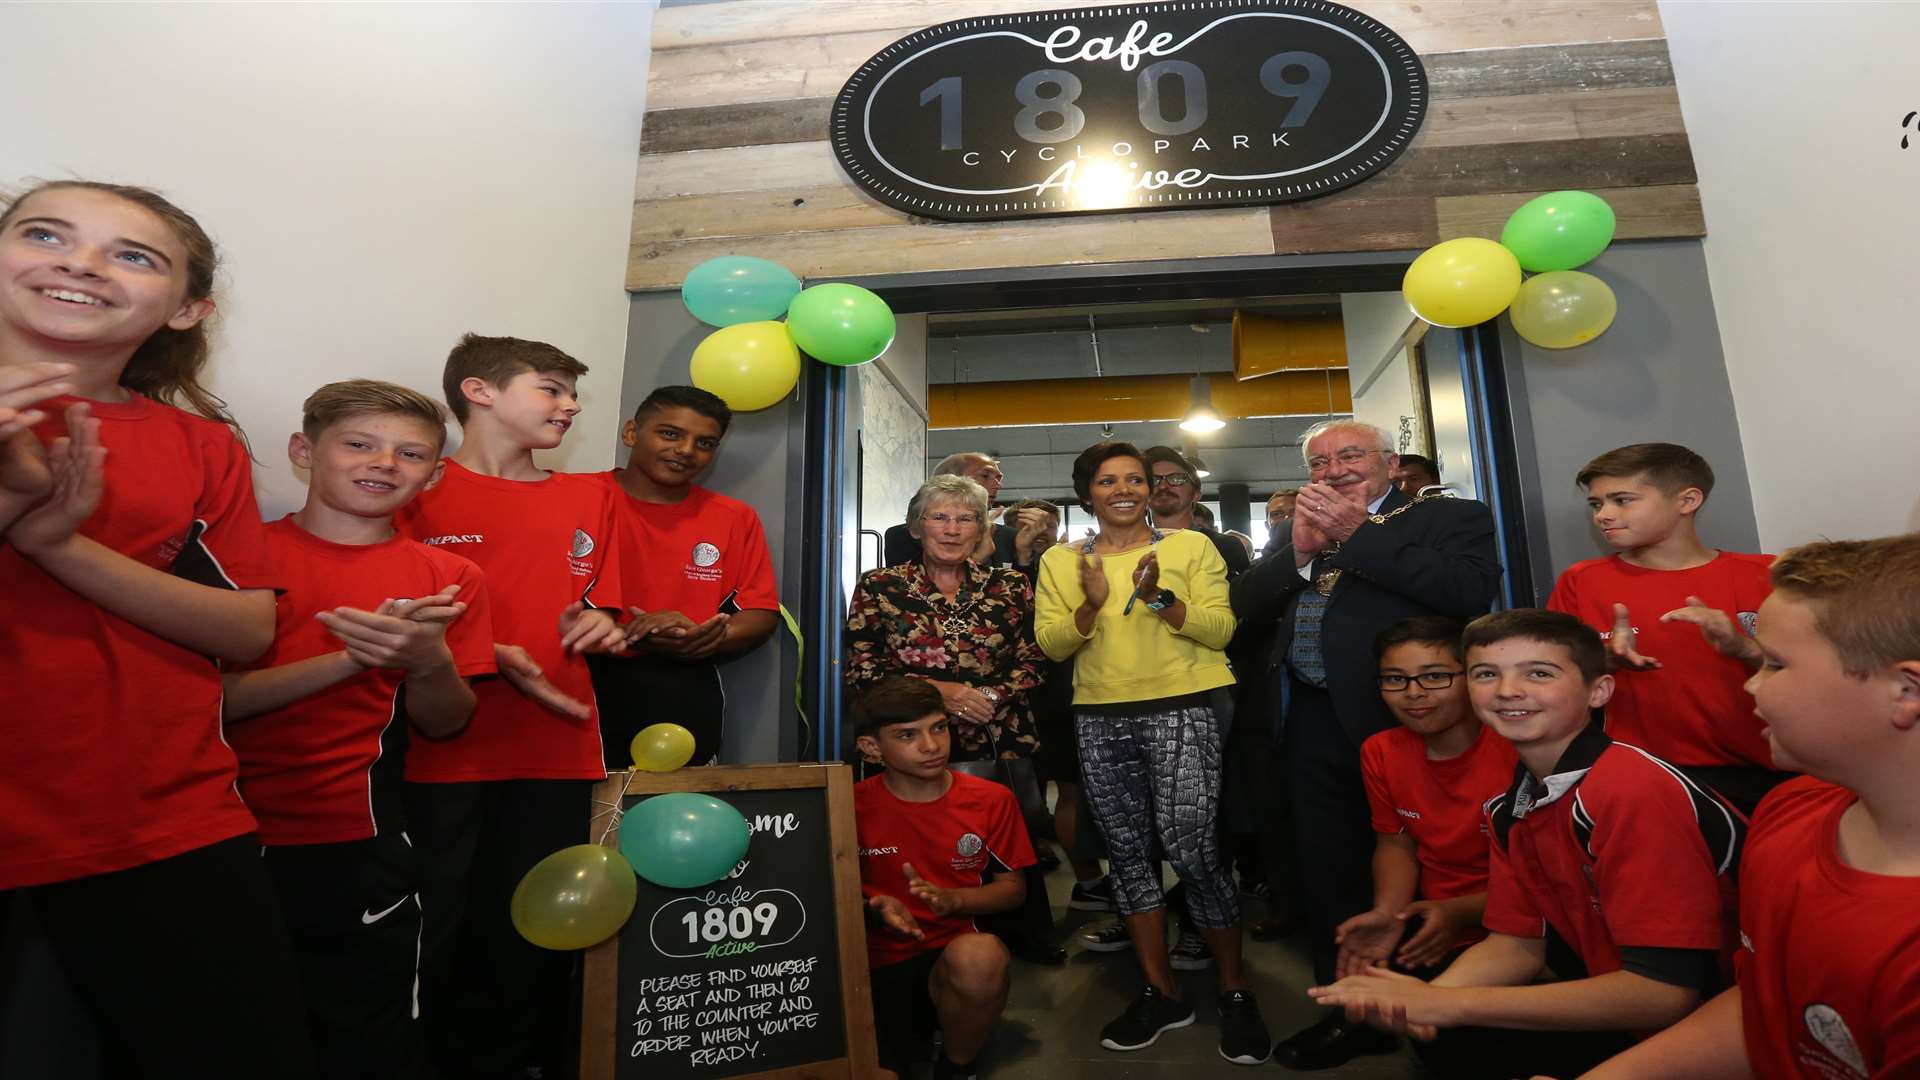 Dame Kelly Holmes only opened the cafe in June. Picture: John Westhrop